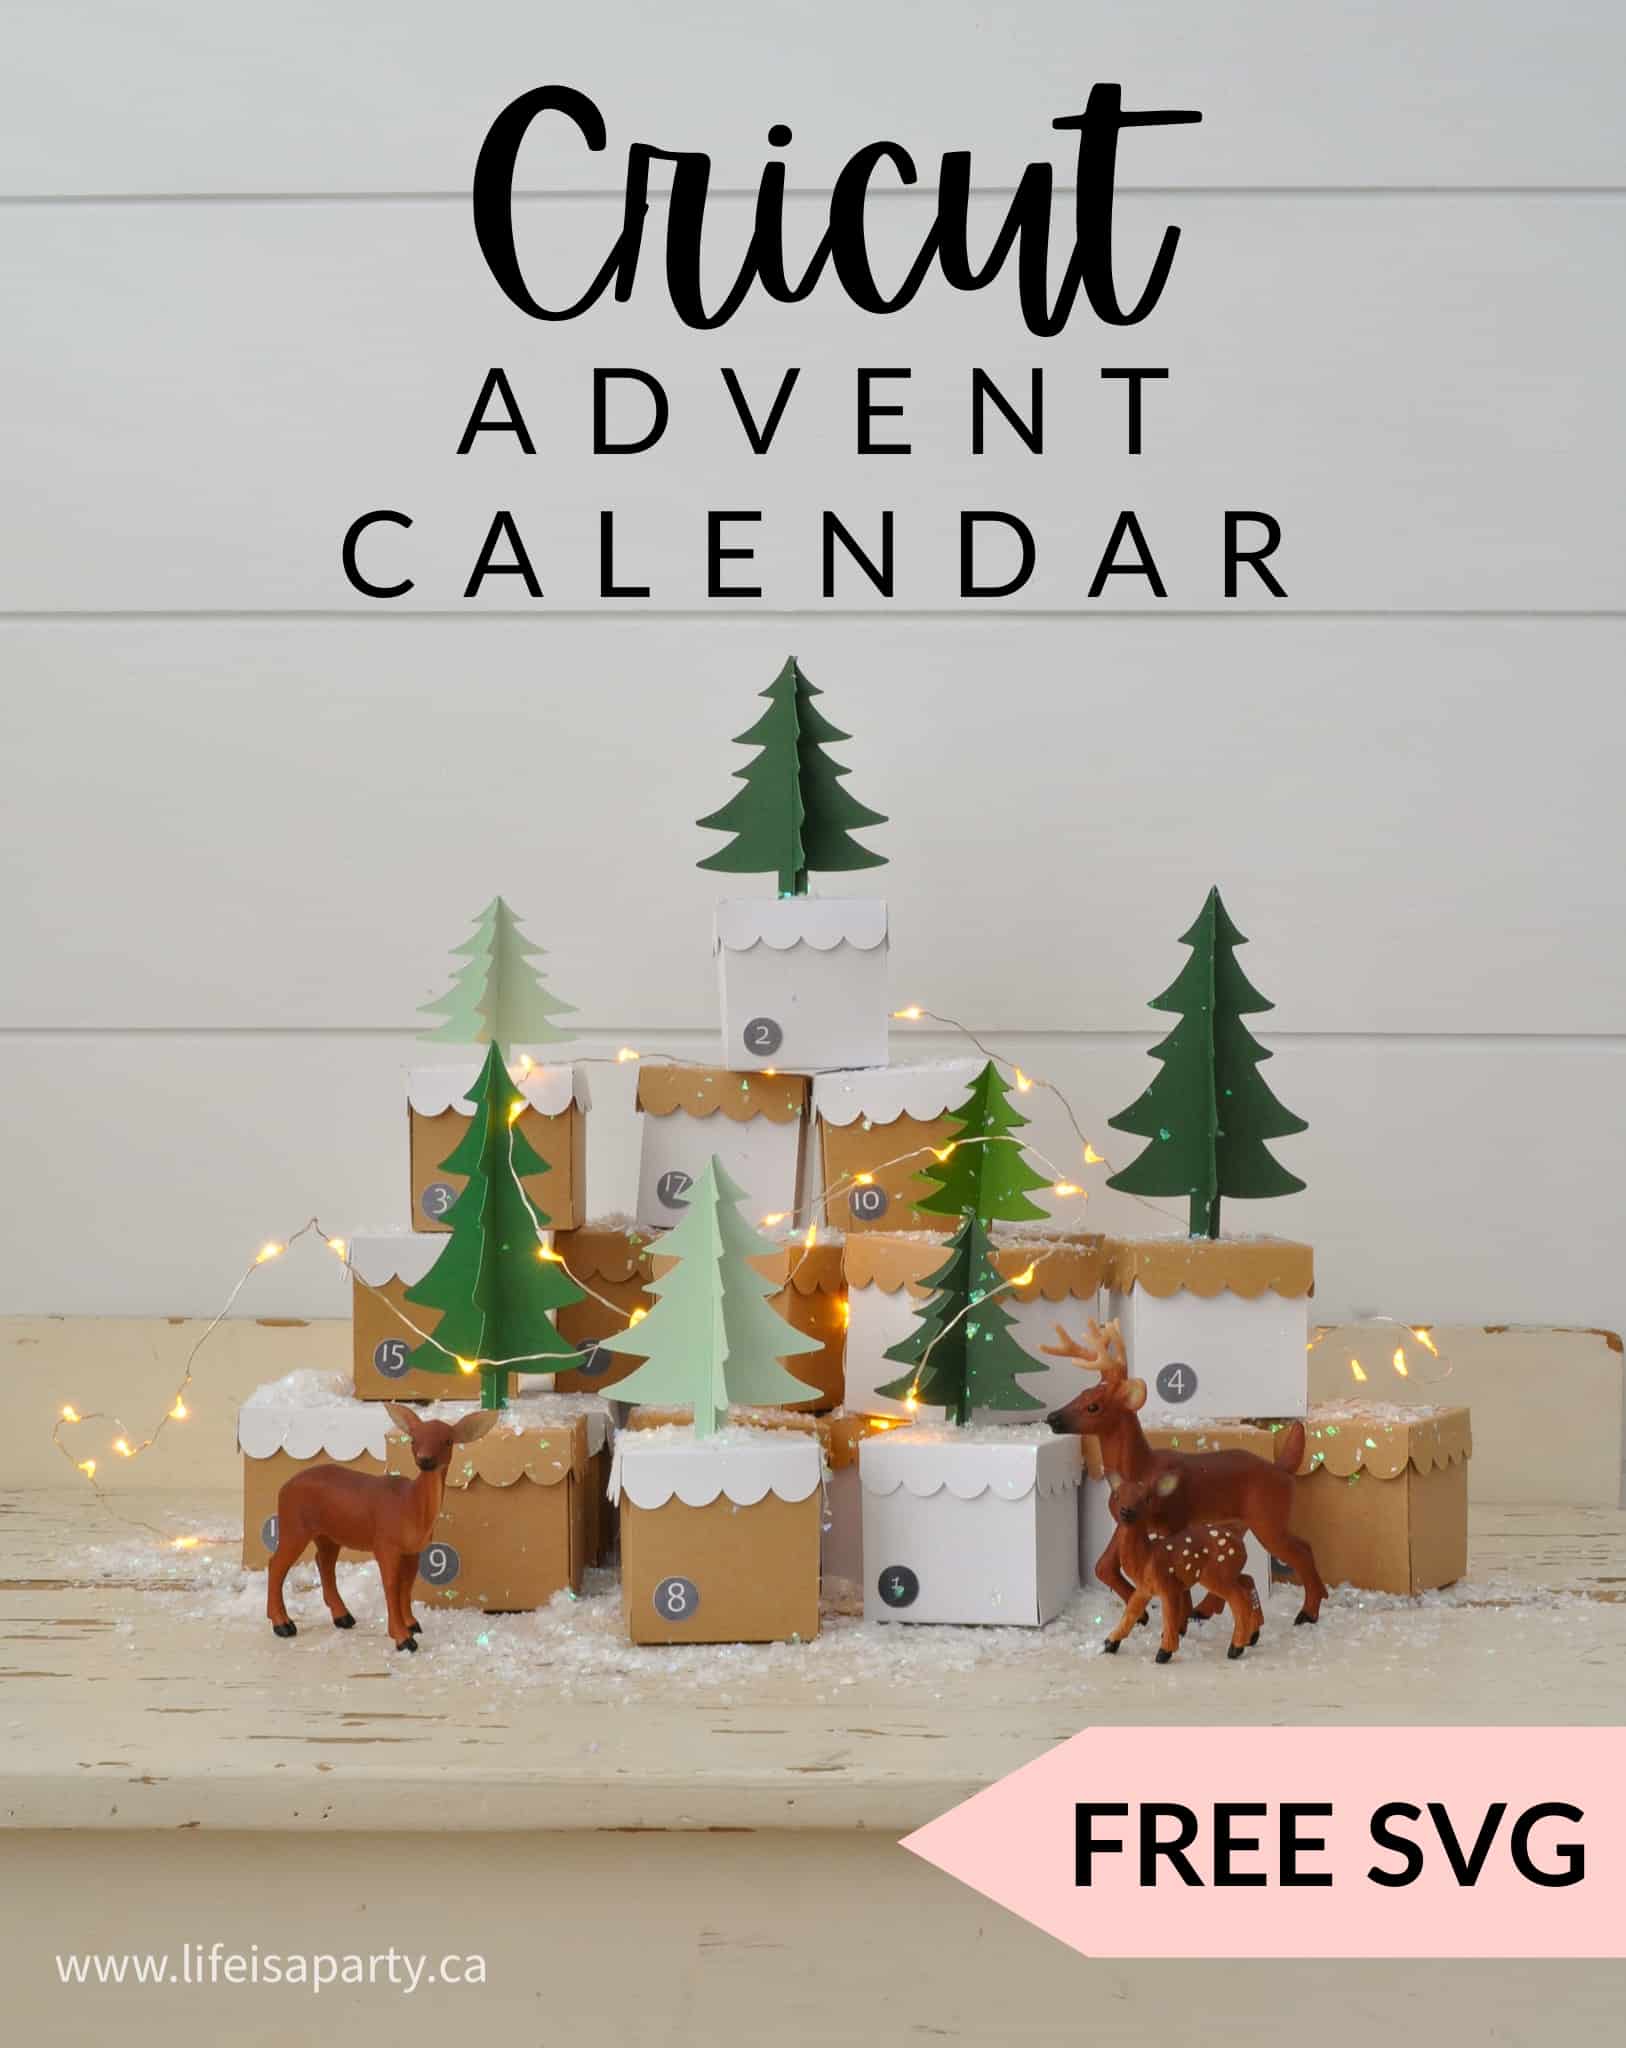 Cricut Advent Calendar: free SVG cut file to create a reusable paper box advent calendar to fill with treats, activities, or gifts.